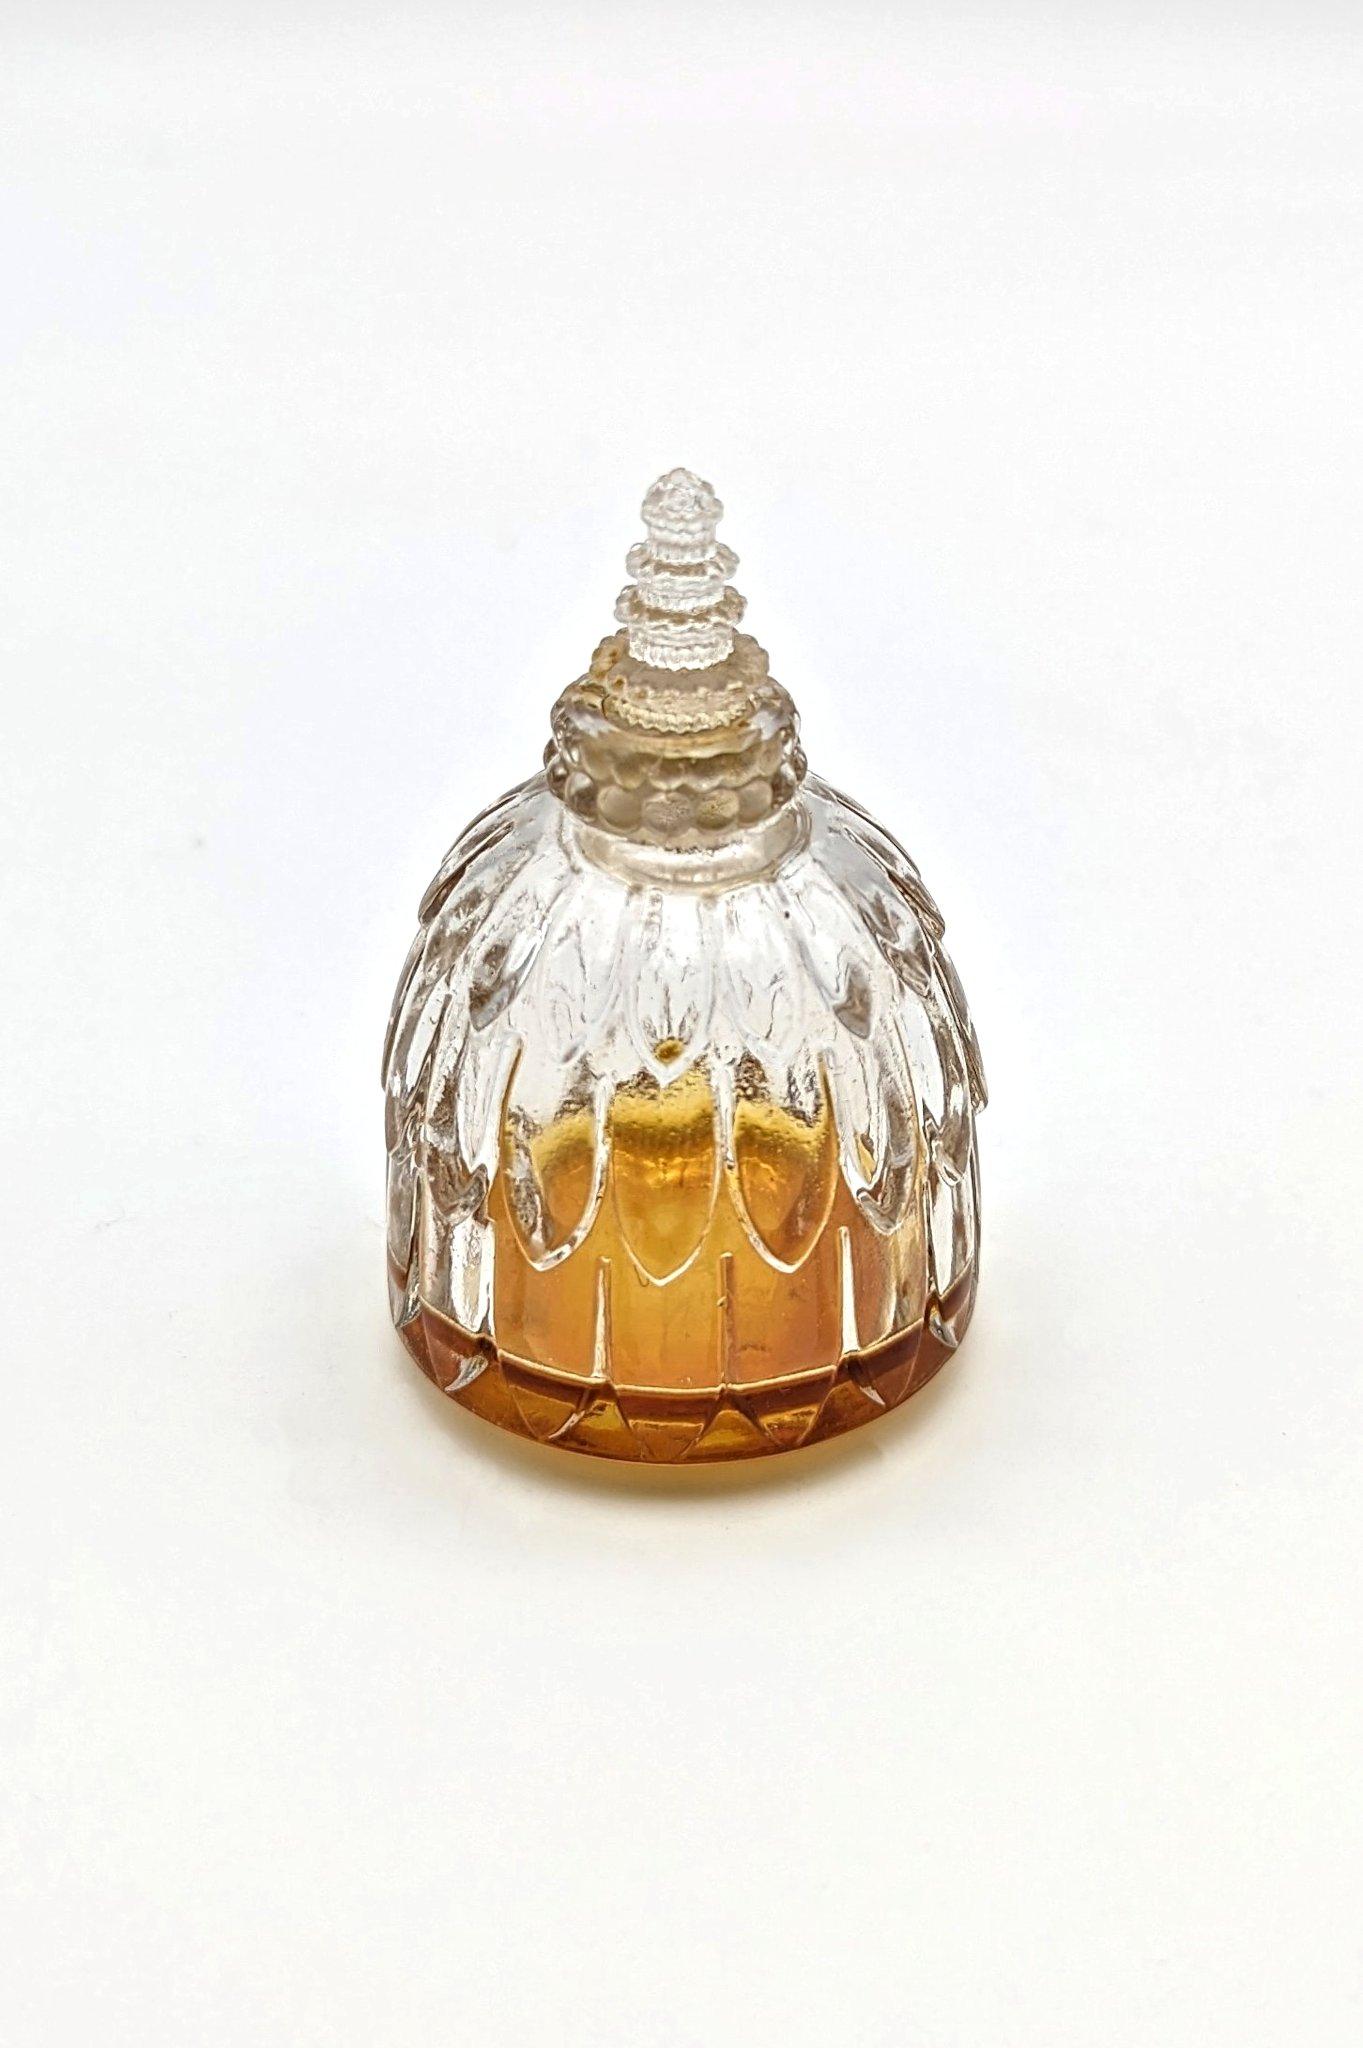 A wonderful design by René Lalique from 1929 for an art deco perfume bottle for the perfume company Forvil. 